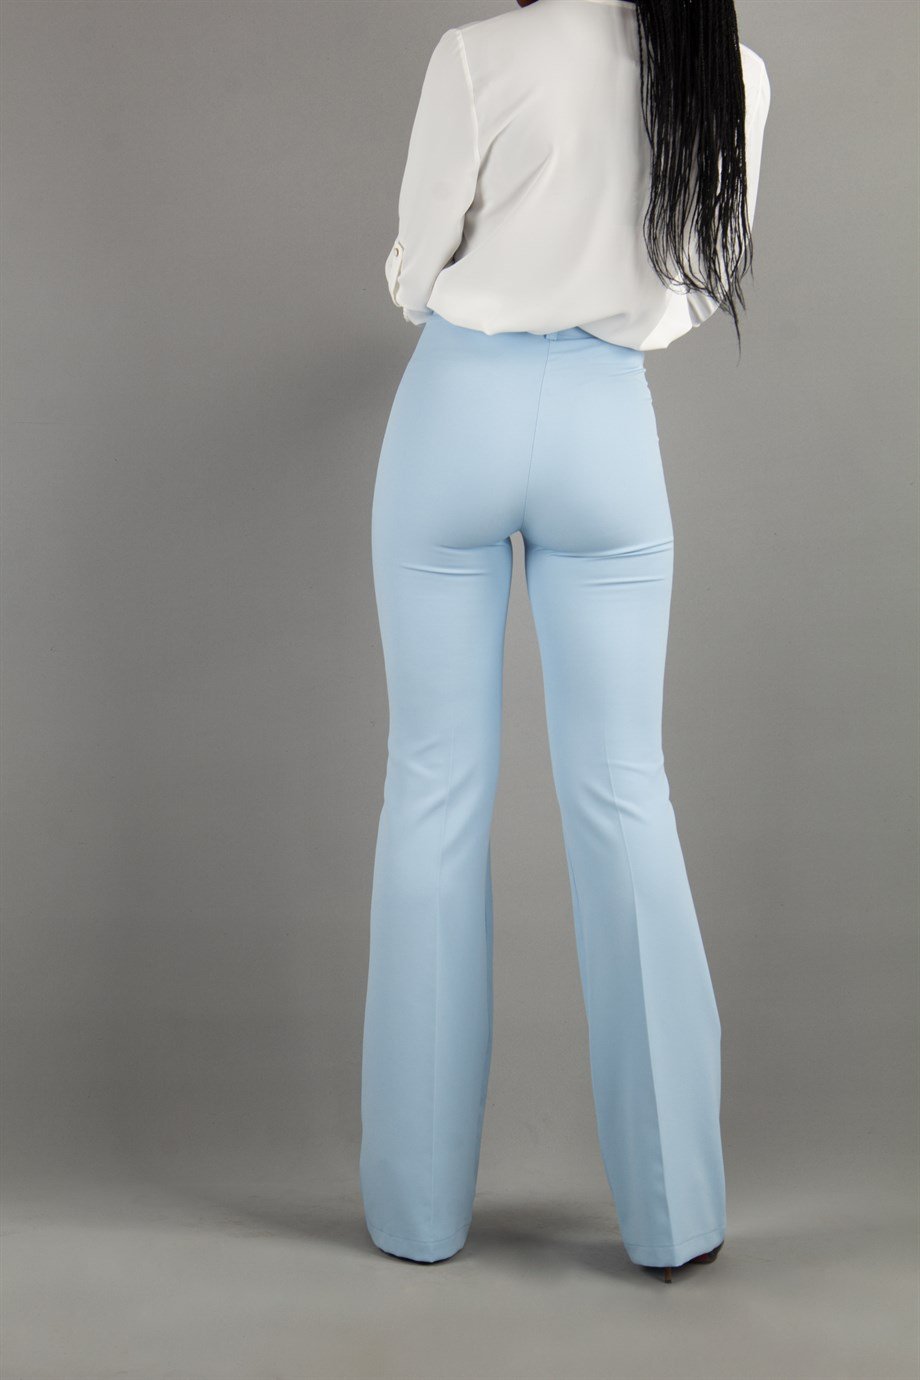 Classic Pants Office Big Size Trouser - Baby Blue - Wholesale Womens  Clothing Vendors For Boutiques